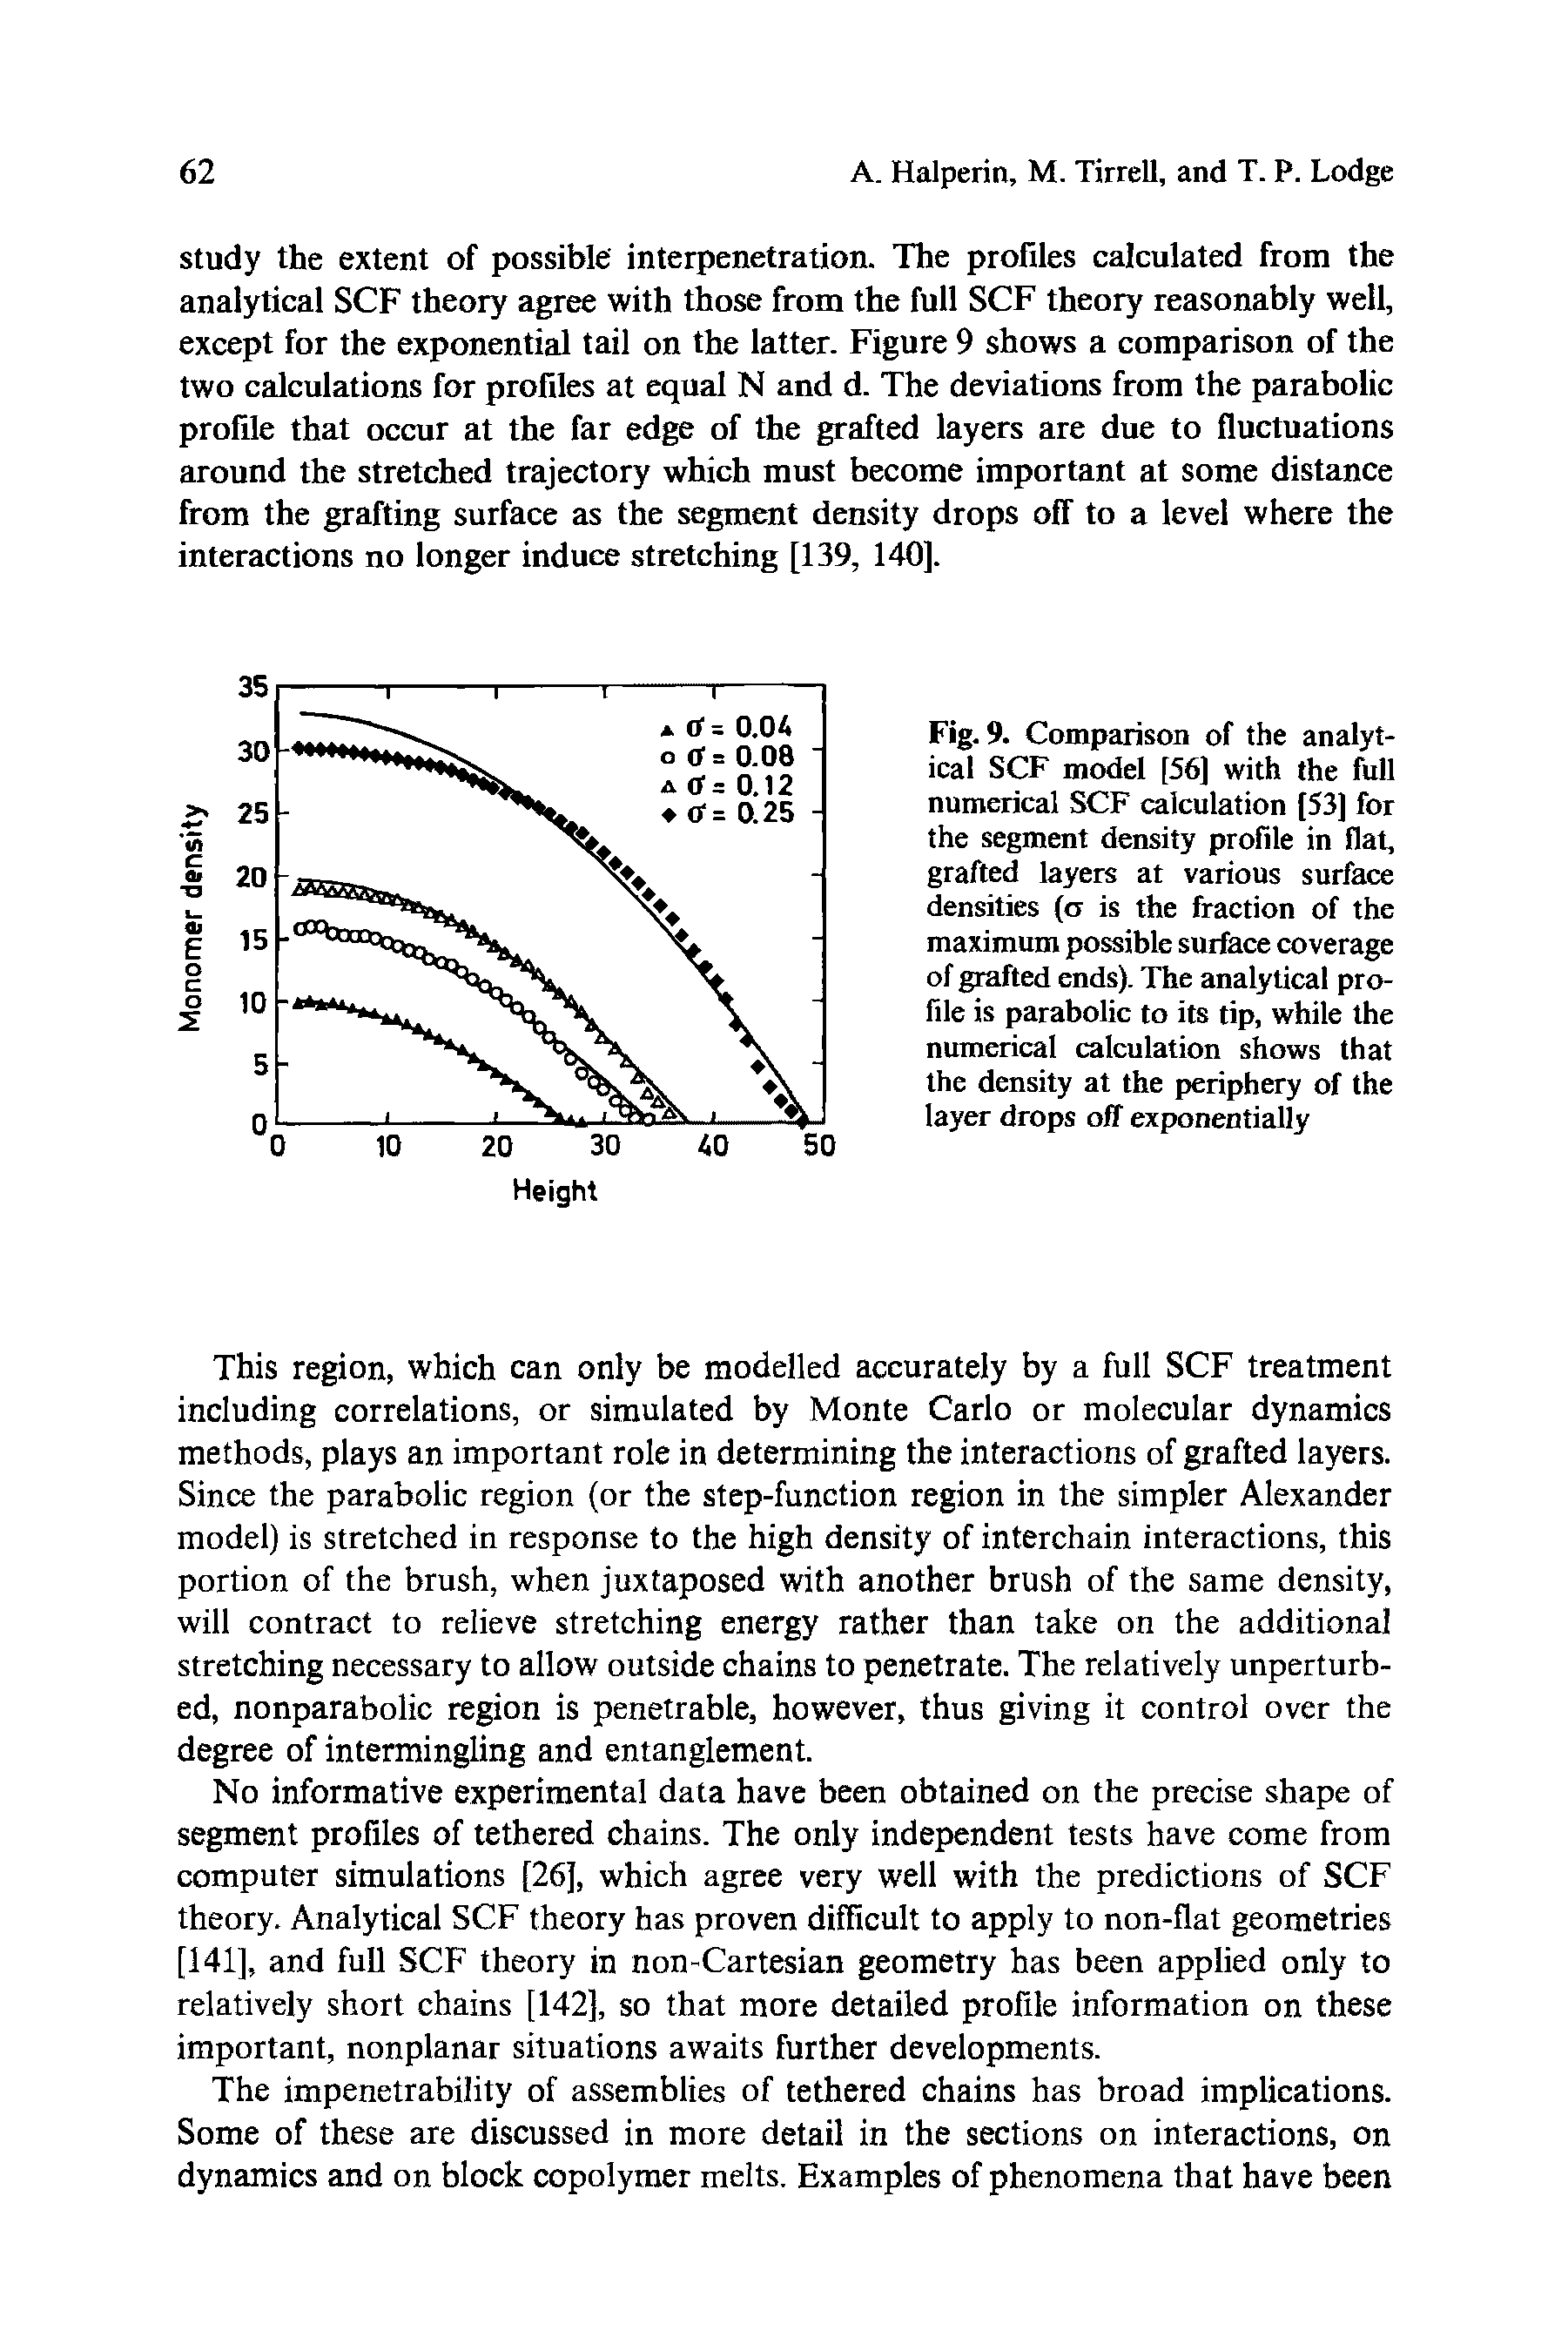 Fig. 9. Comparison of the analytical SCF model [56] with the full numerical SCF calculation [53] for the segment density profile in flat, grafted layers at various surface densities (o is the fraction of the maximum possible surface coverage of grafted ends). The analytical profile is parabolic to its tip, while the numerical calculation shows that the density at the periphery of the layer drops off exponentially...